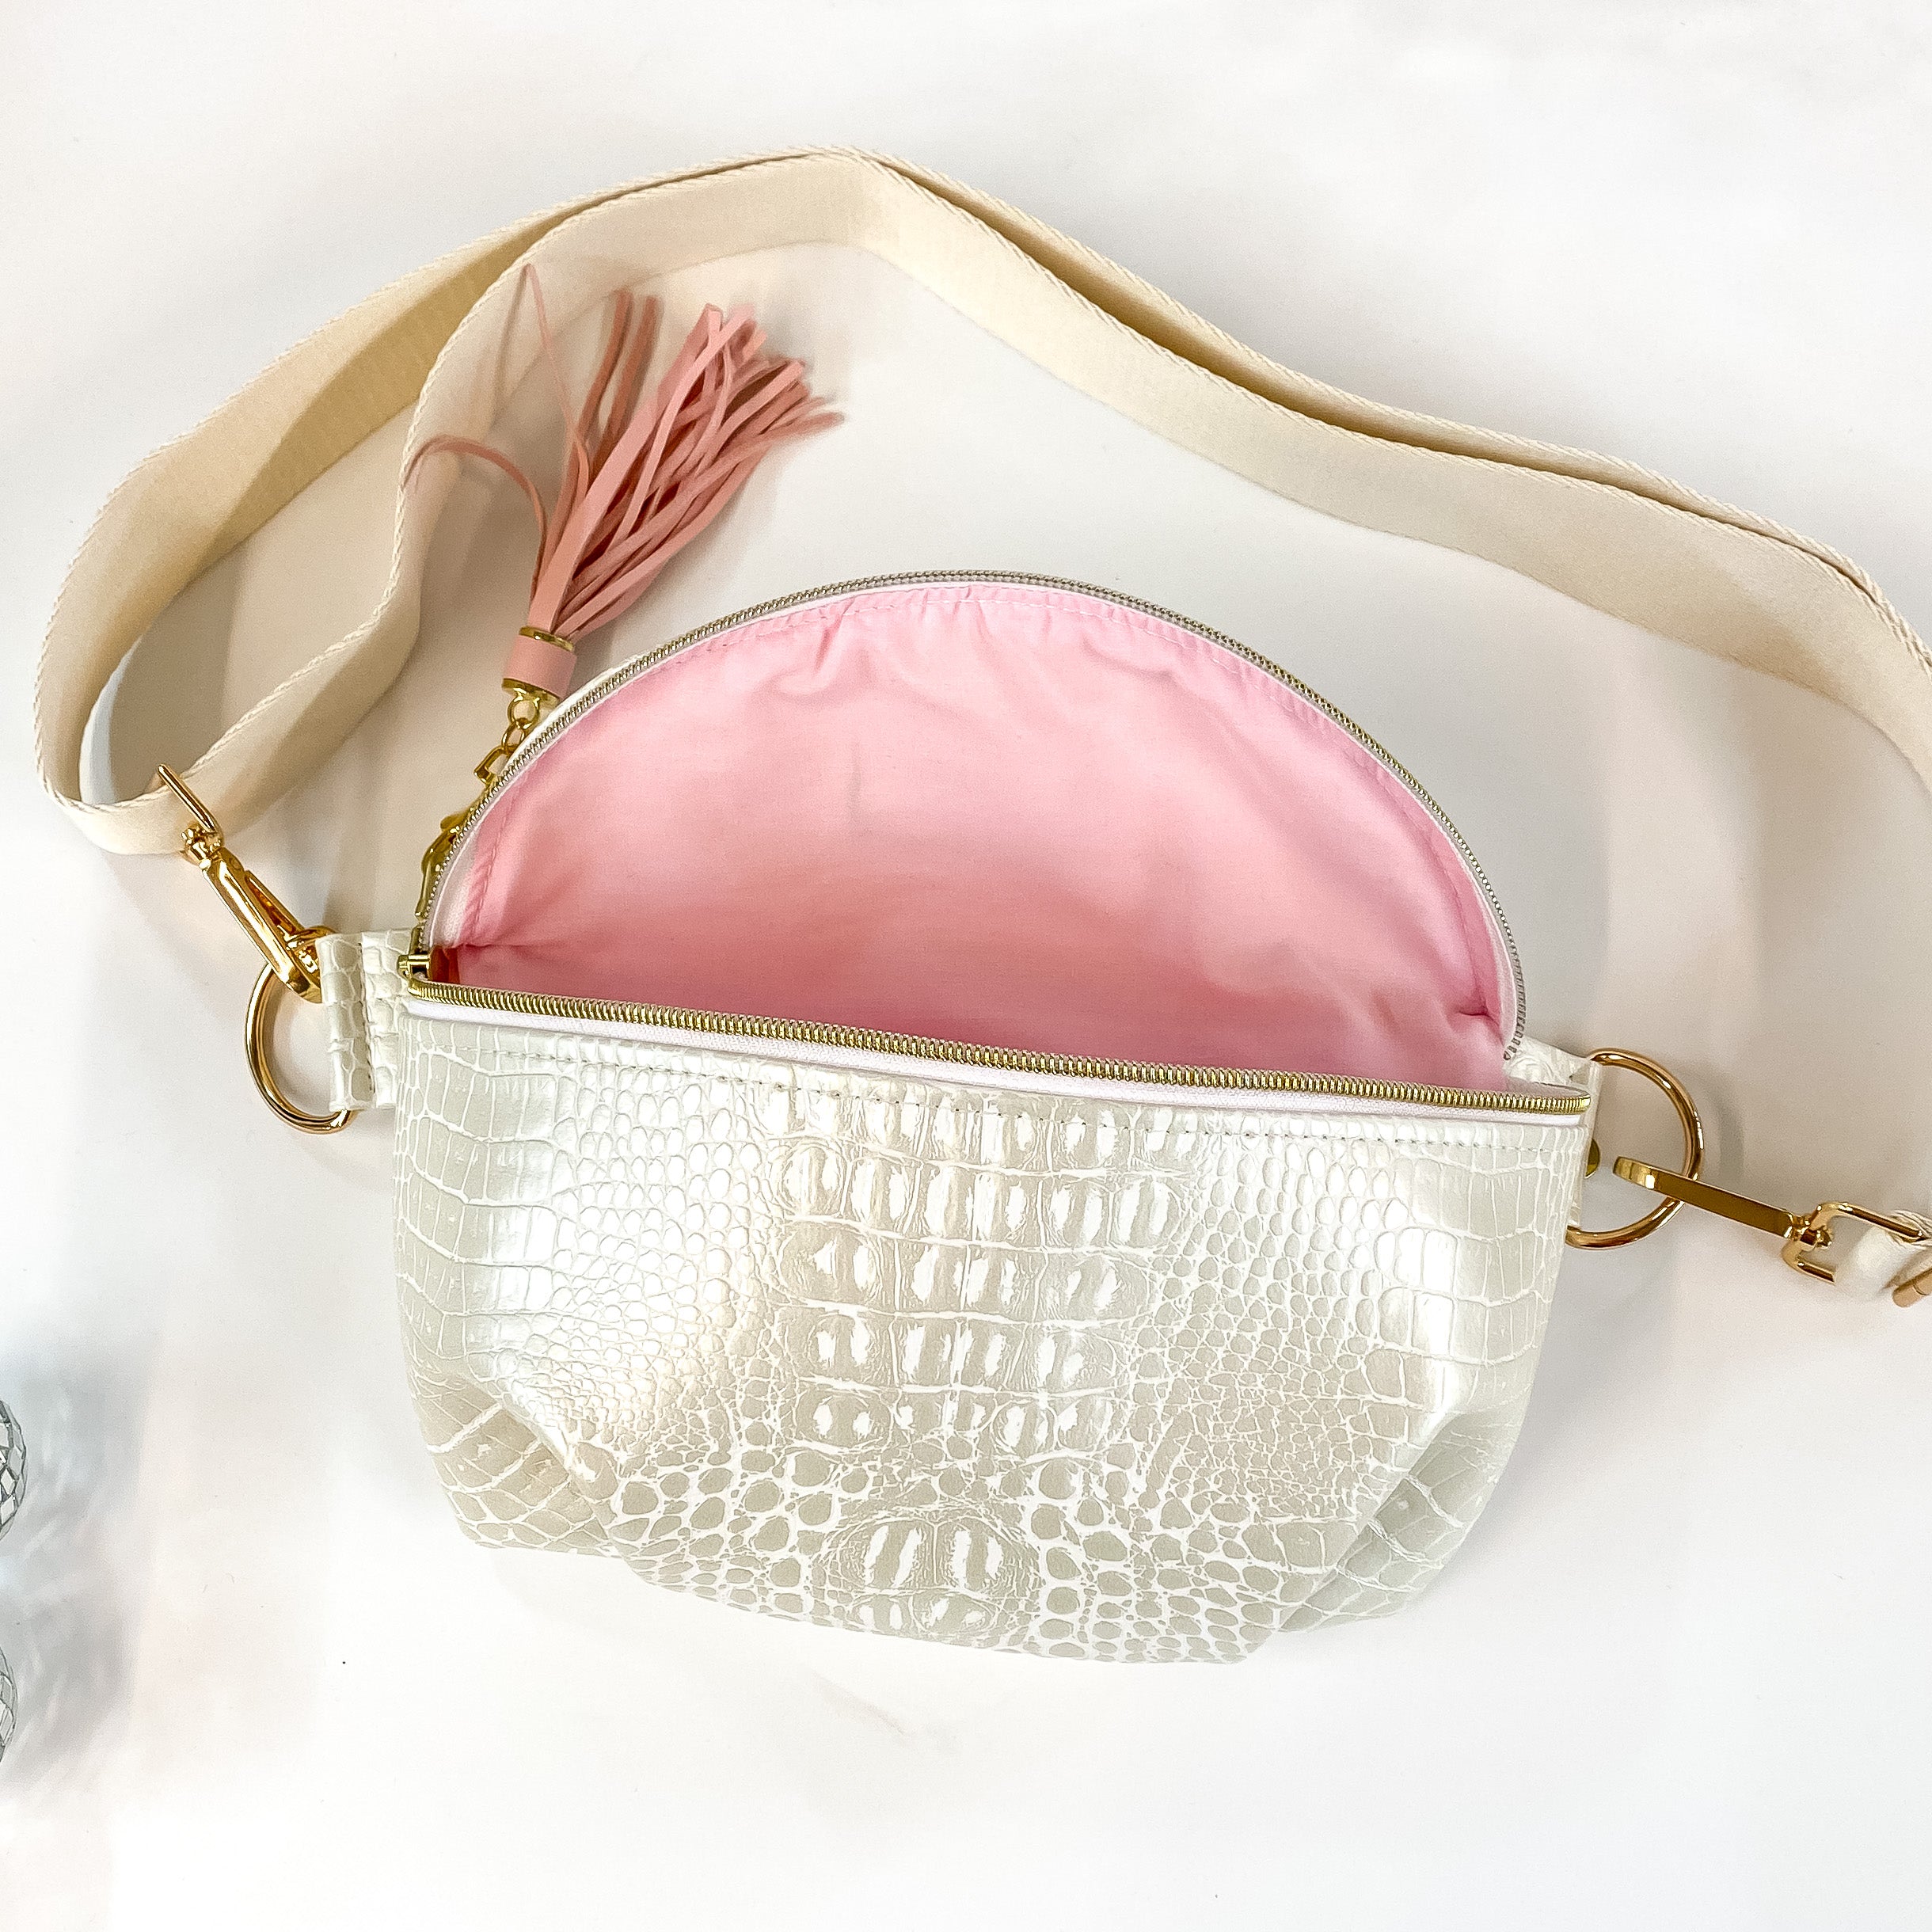 Makeup Junkie | Shade of Pearl Sidekick with Back Zipper in Pearl White Croc Print - Giddy Up Glamour Boutique